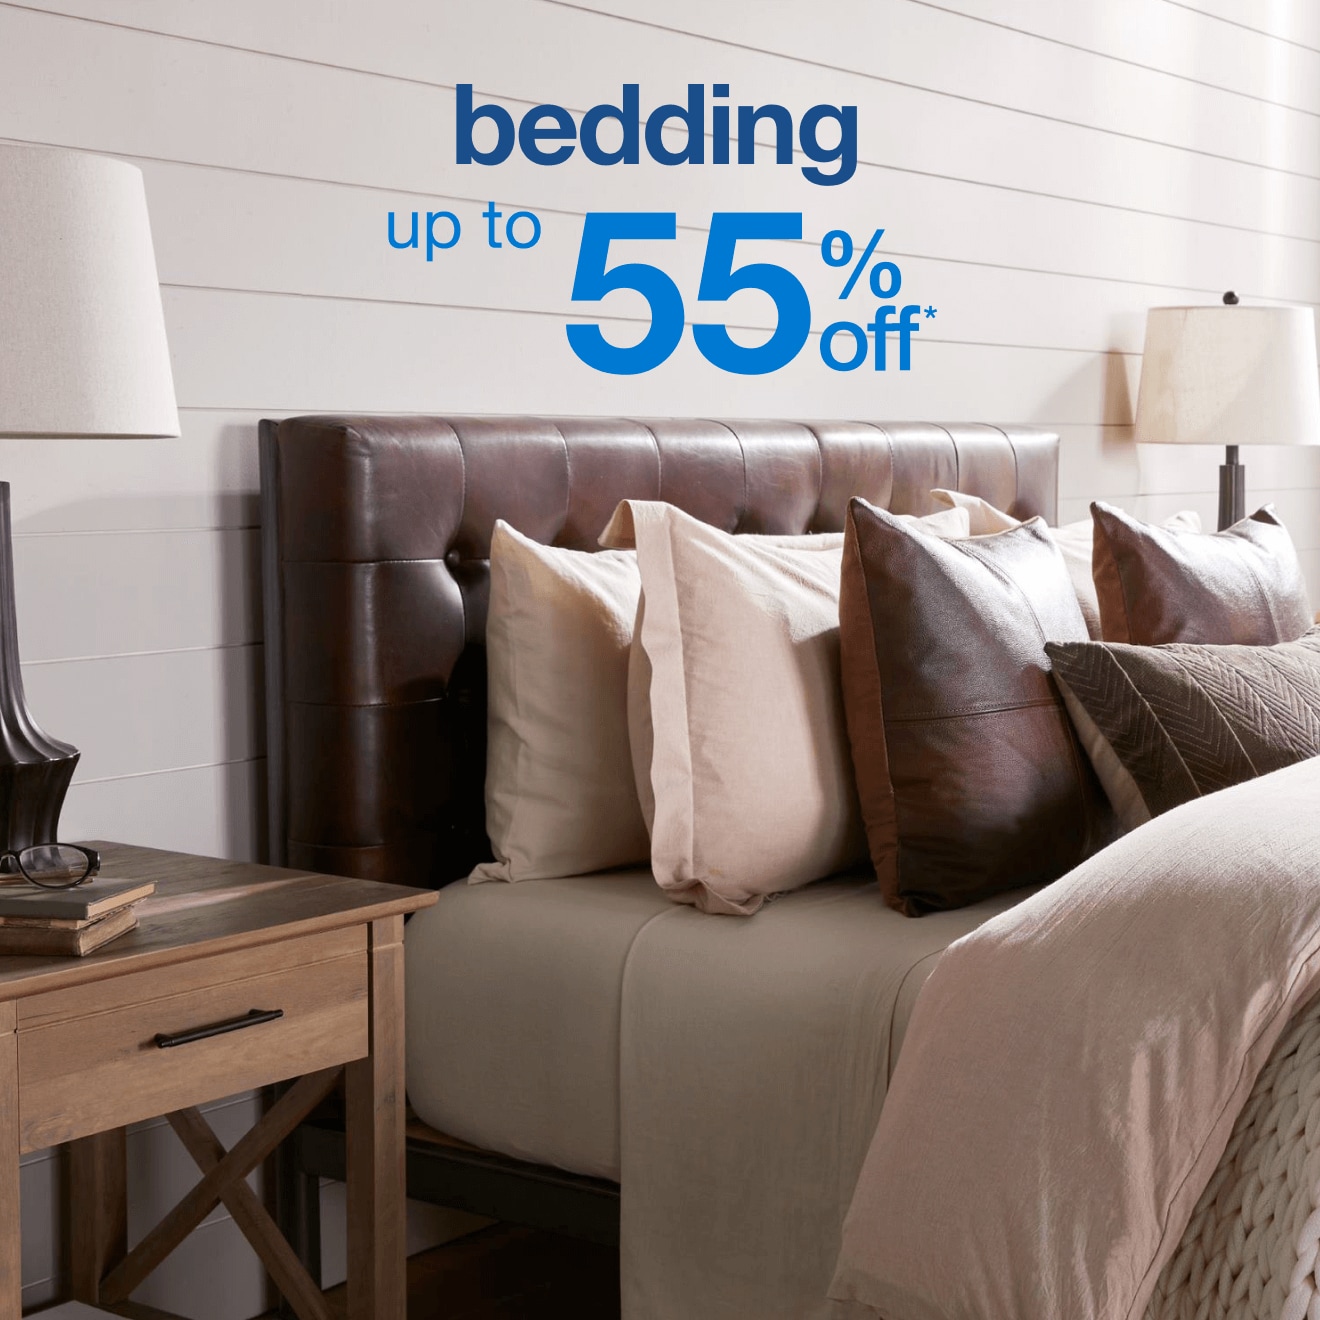 Bedding up to 55% off* — Shop Now!